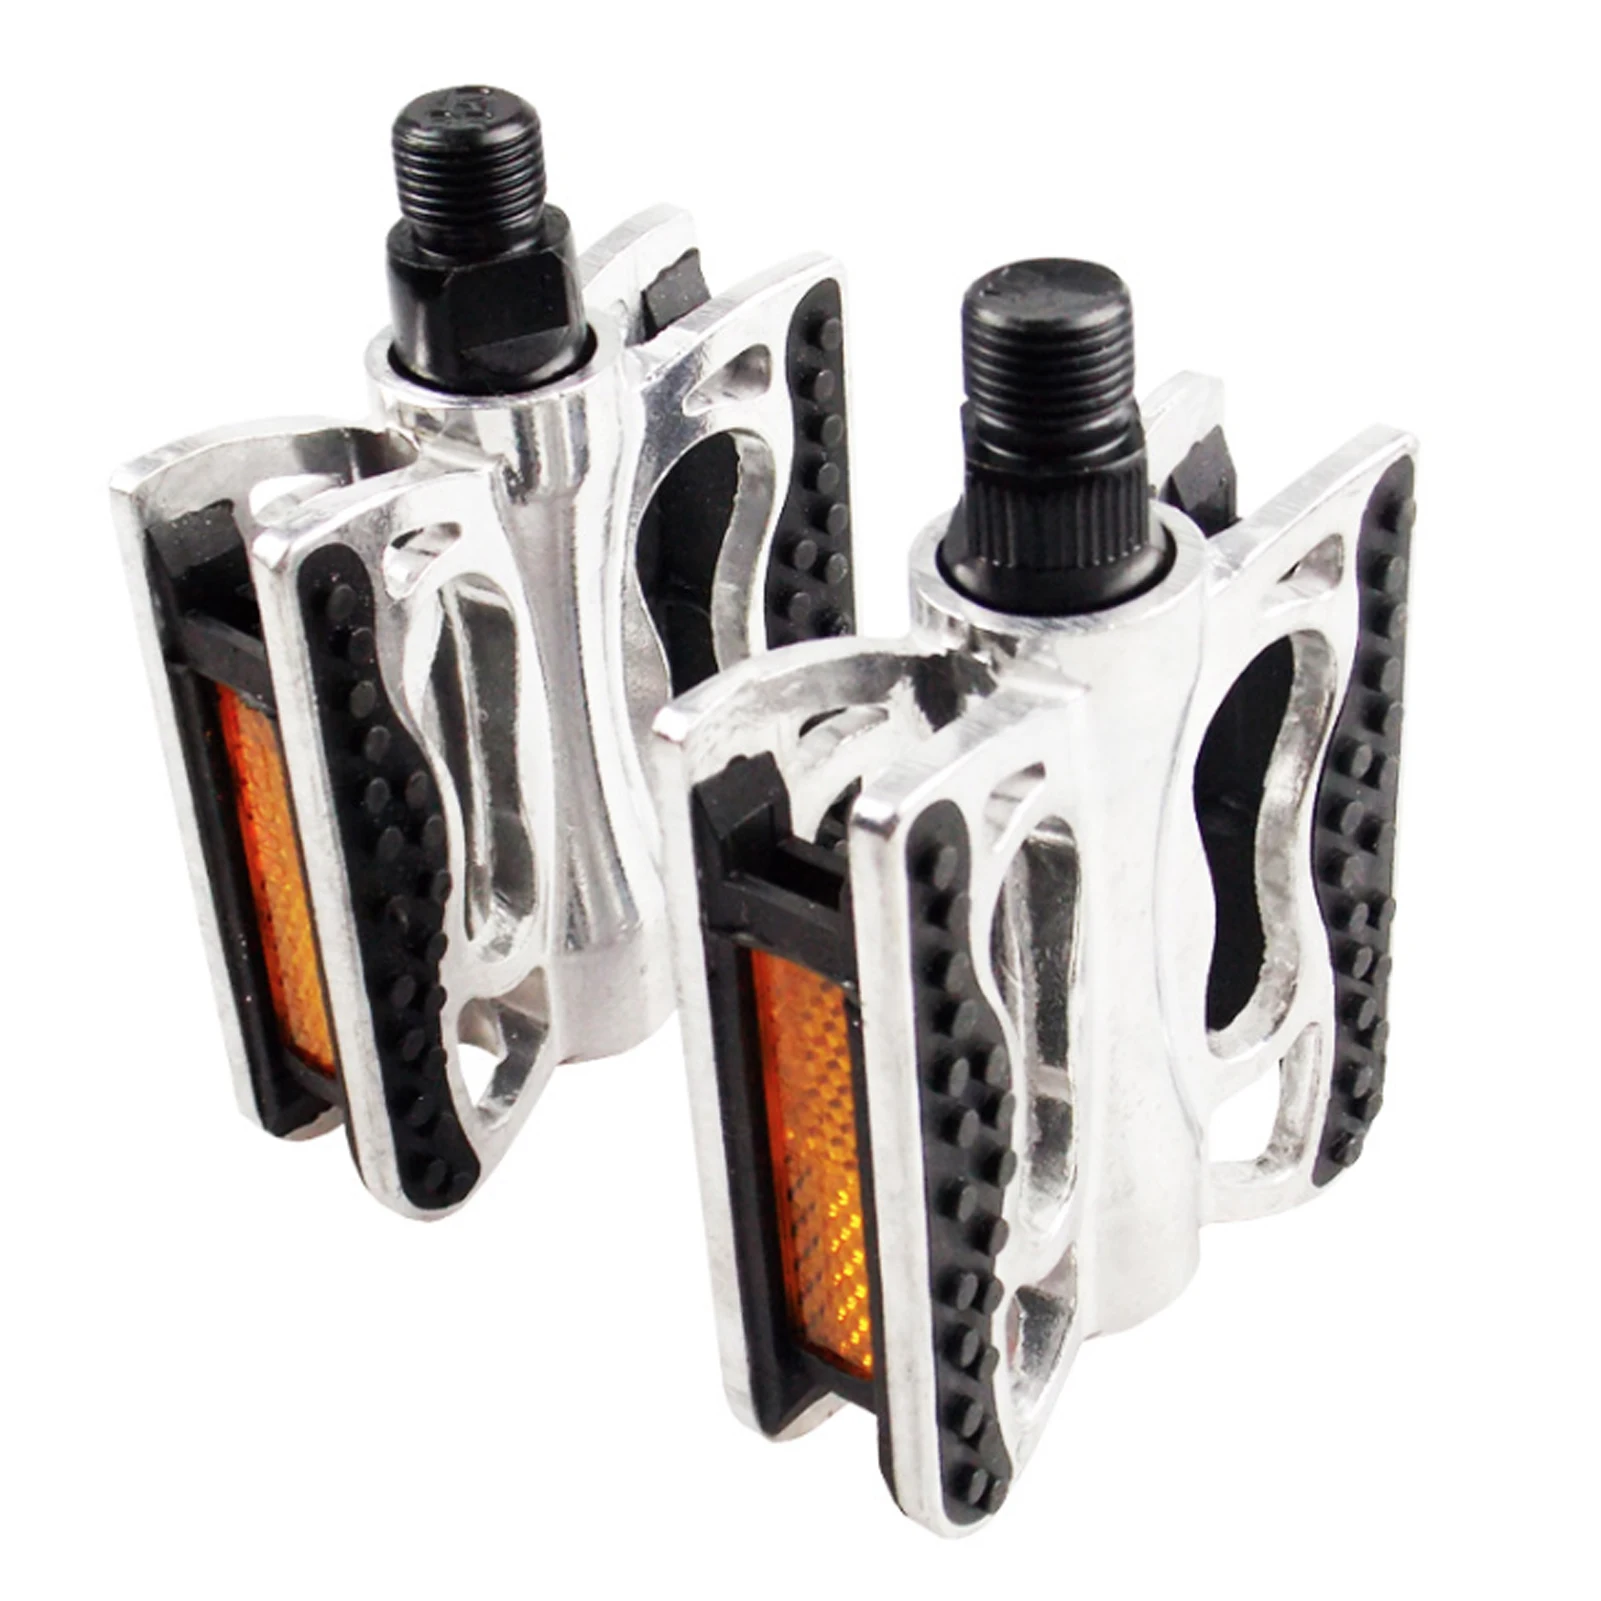 1 Pair MTB Aluminium Alloy Mountain Bike Bicycle Cycling Pedals Flat-Silver Ultra-light Non-Slip Bicycle Pedal